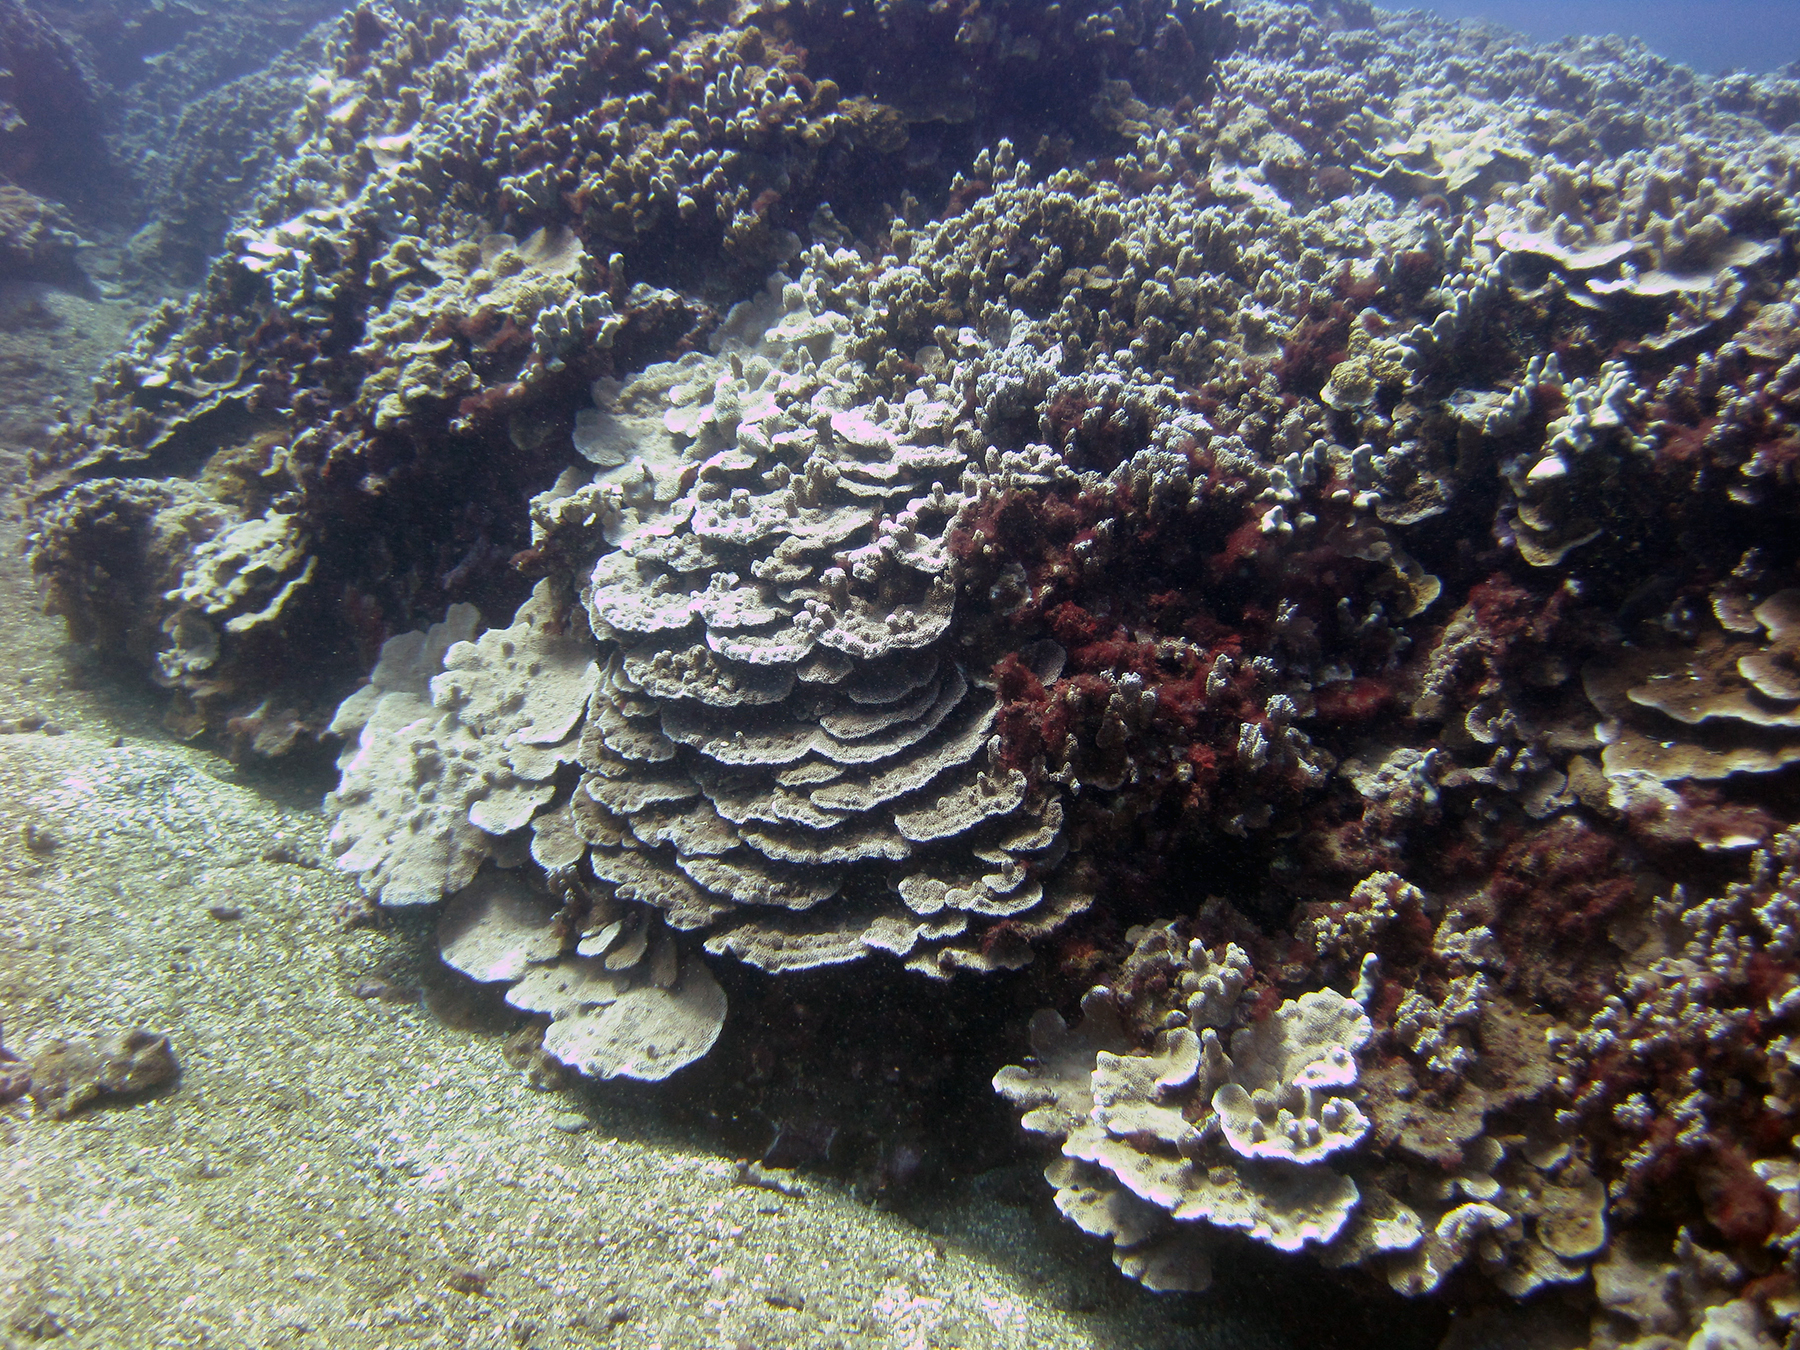 Assessing impacts of coral bleaching: NOAA scientists embar...th survey of coral reef ecosystems in the Hawaiian
Archipelago